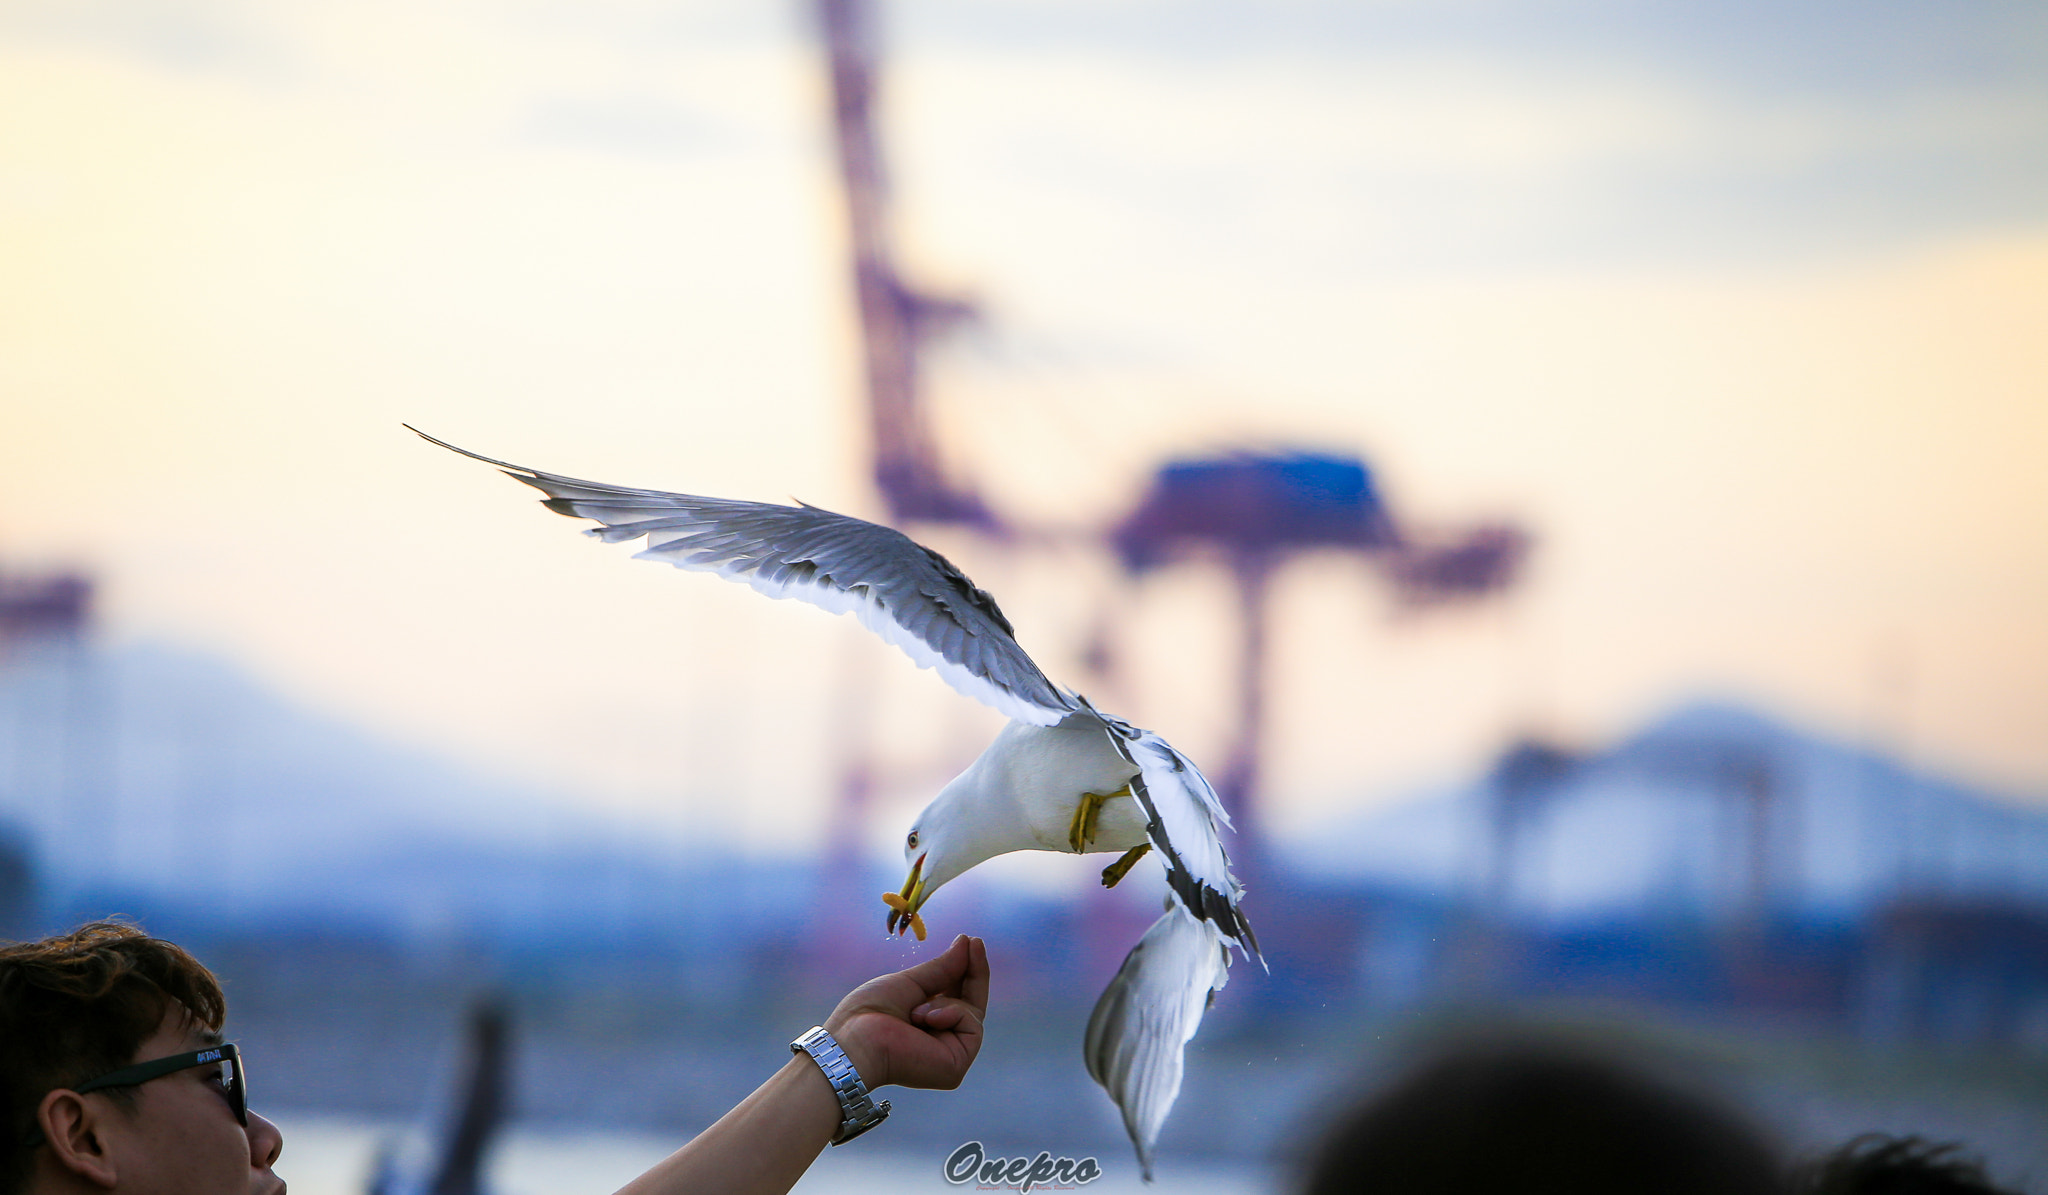 Canon EOS 6D sample photo. Onepro - 갈매기와 남자 (seagull and the man) photography